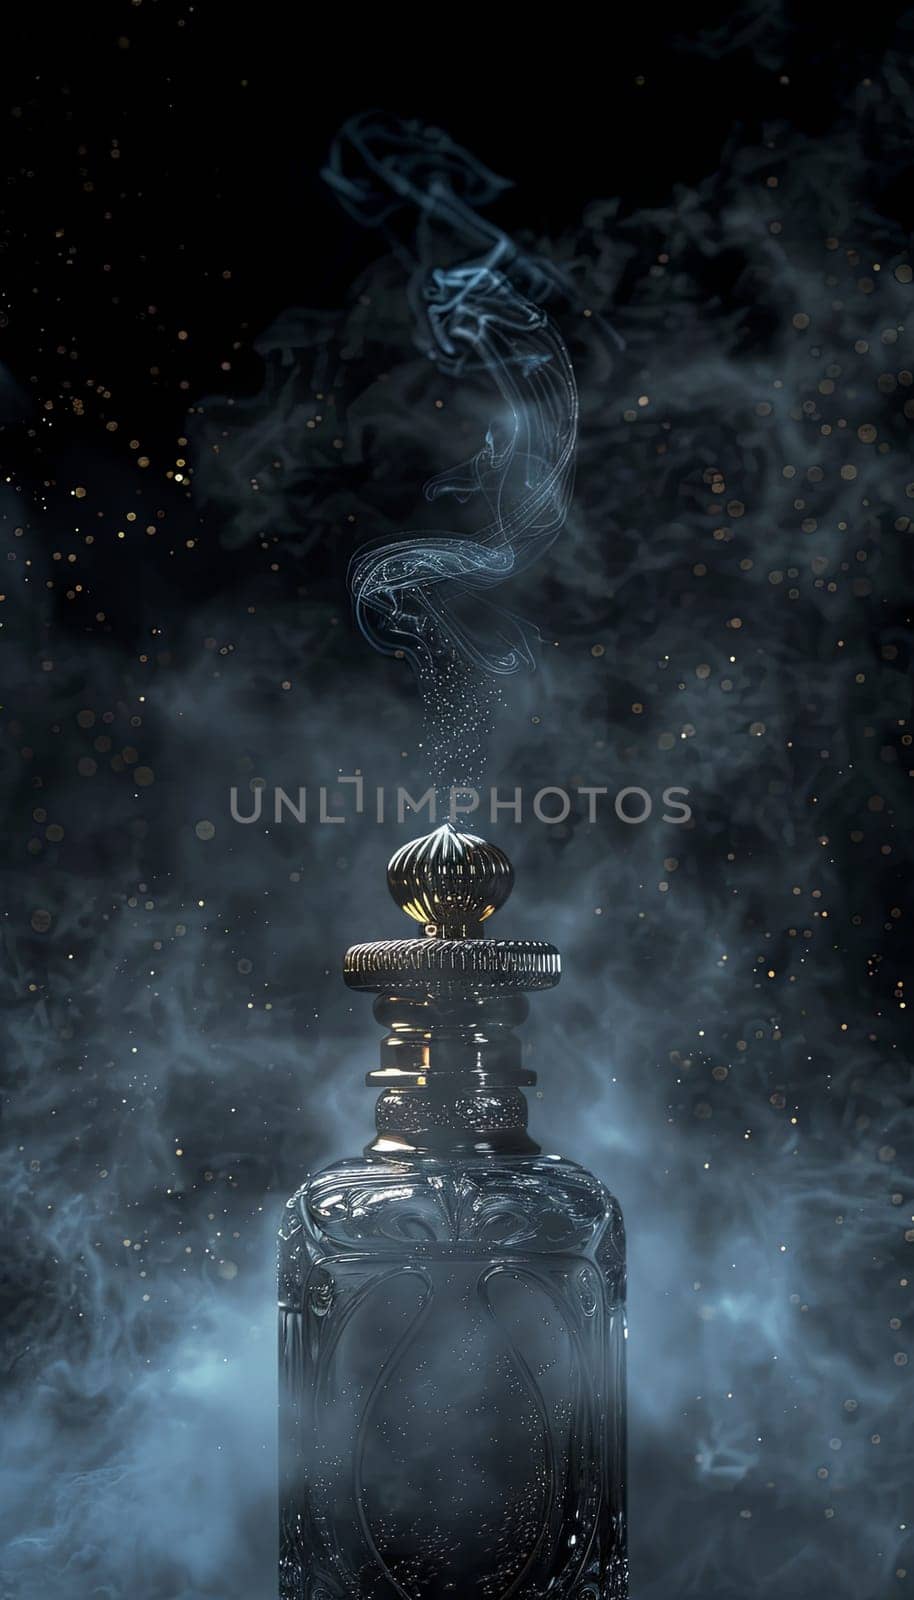 A close-up of an ornate perfume bottle with a silver top, emitting a delicate mist against a dark background.